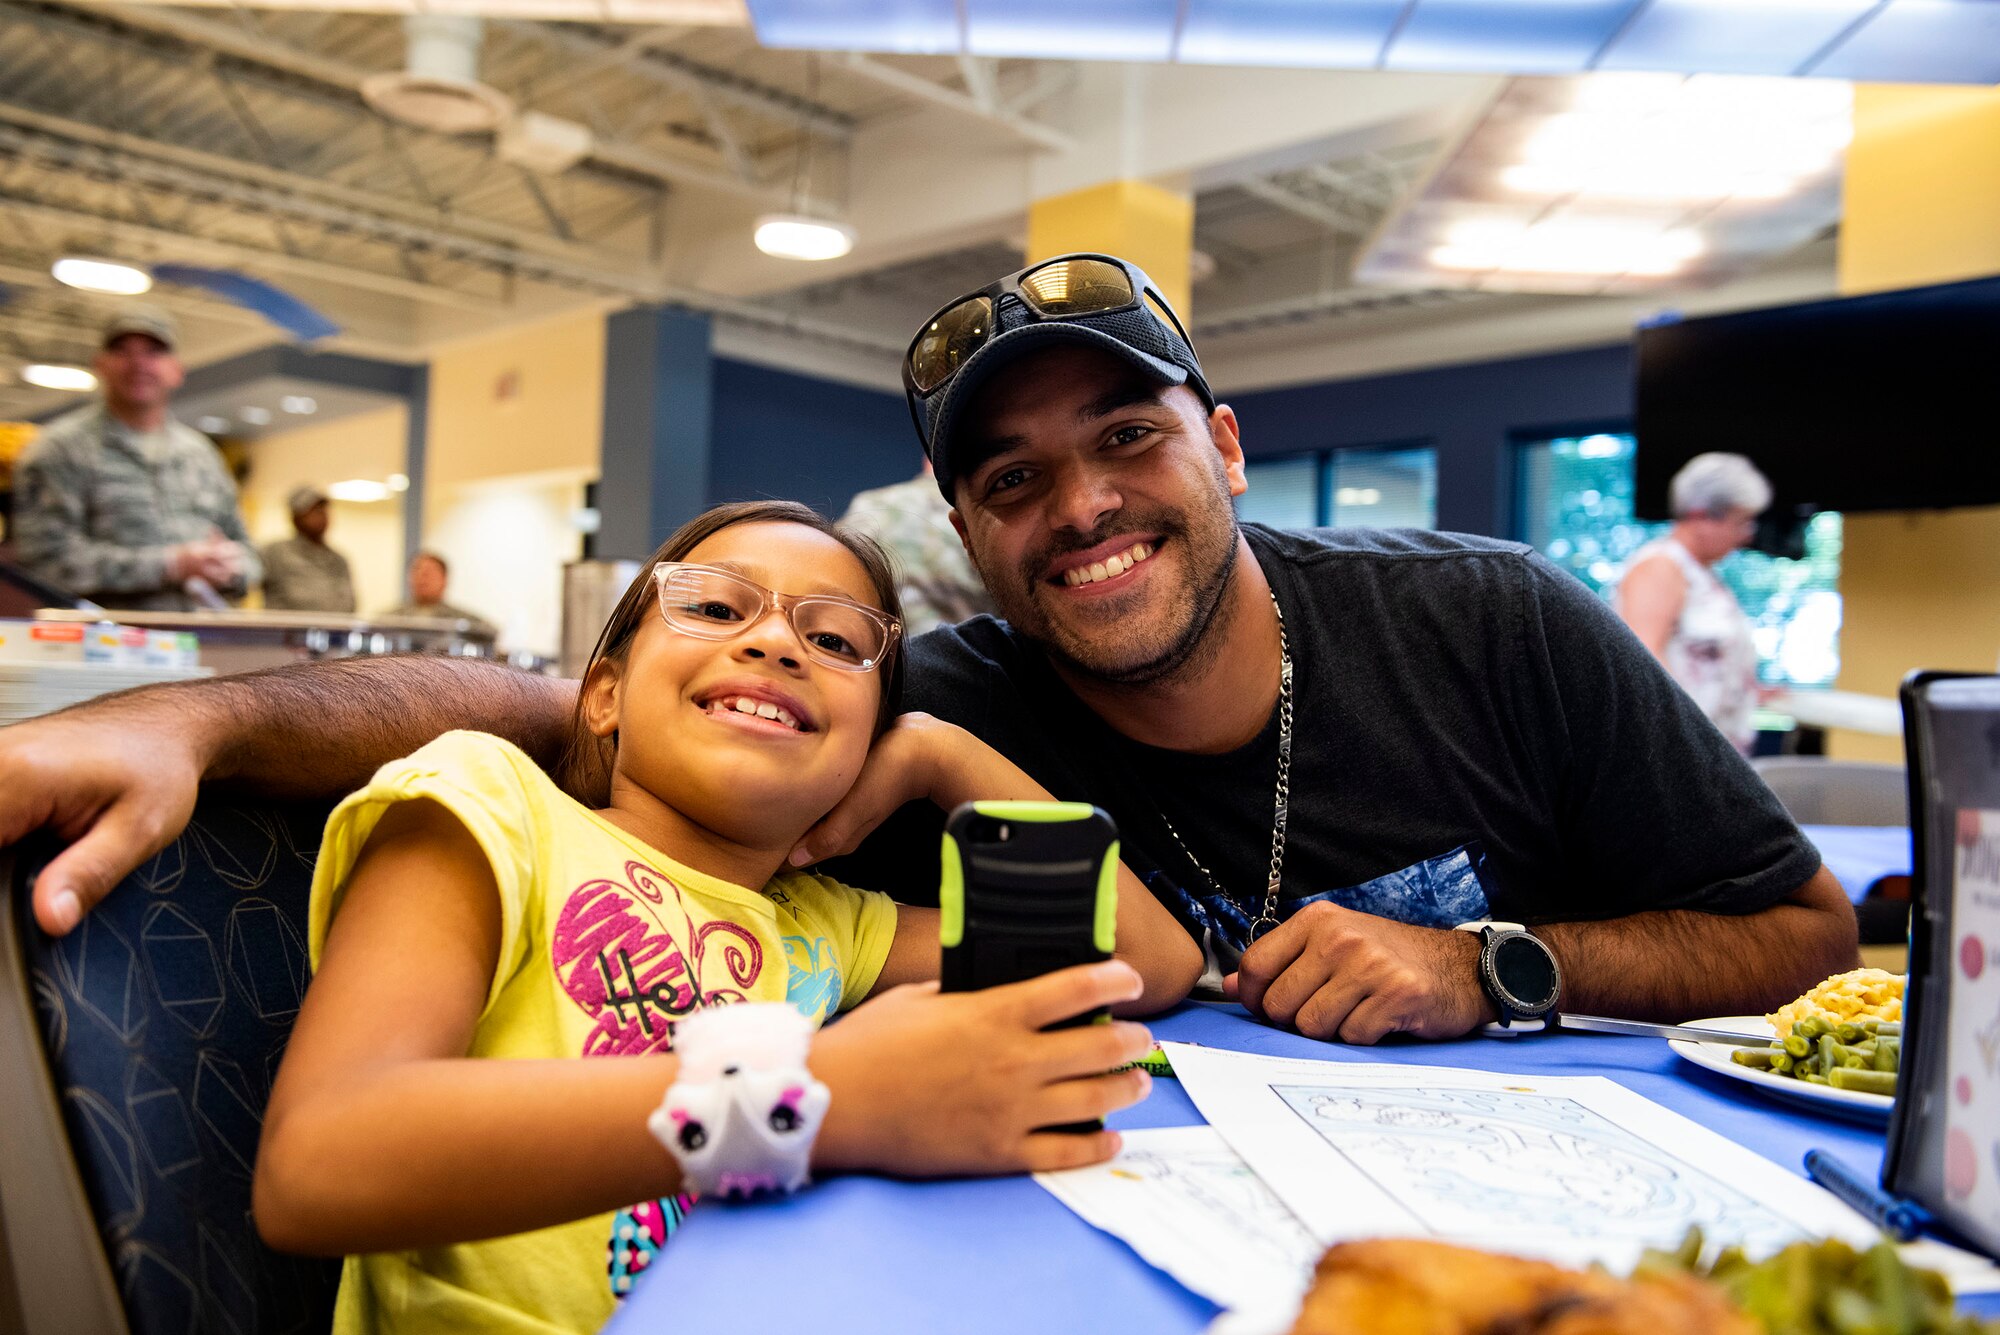 David Garcia, right, military spouse, and his daughter Delena, pose for a photo during a Deployed Spouses Dinner Sept. 17, 2019, at Moody Air Force Base, Ga. The monthly event is a free dinner at Georgia Pines Dining Facility designed as a ‘thank you’ for each families’ support and sacrifice. The dinner, occurring on every third Tuesday of the month, provides an opportunity for spouses to interact with other families of deployed Airmen, key spouses and unit leadership, as well as provide a break for the spouse while military sponsor is deployed. The next Deployed Spouses Dinner will be Oct. 15. (U.S. Air Force photo by Senior Airman Erick Requadt)